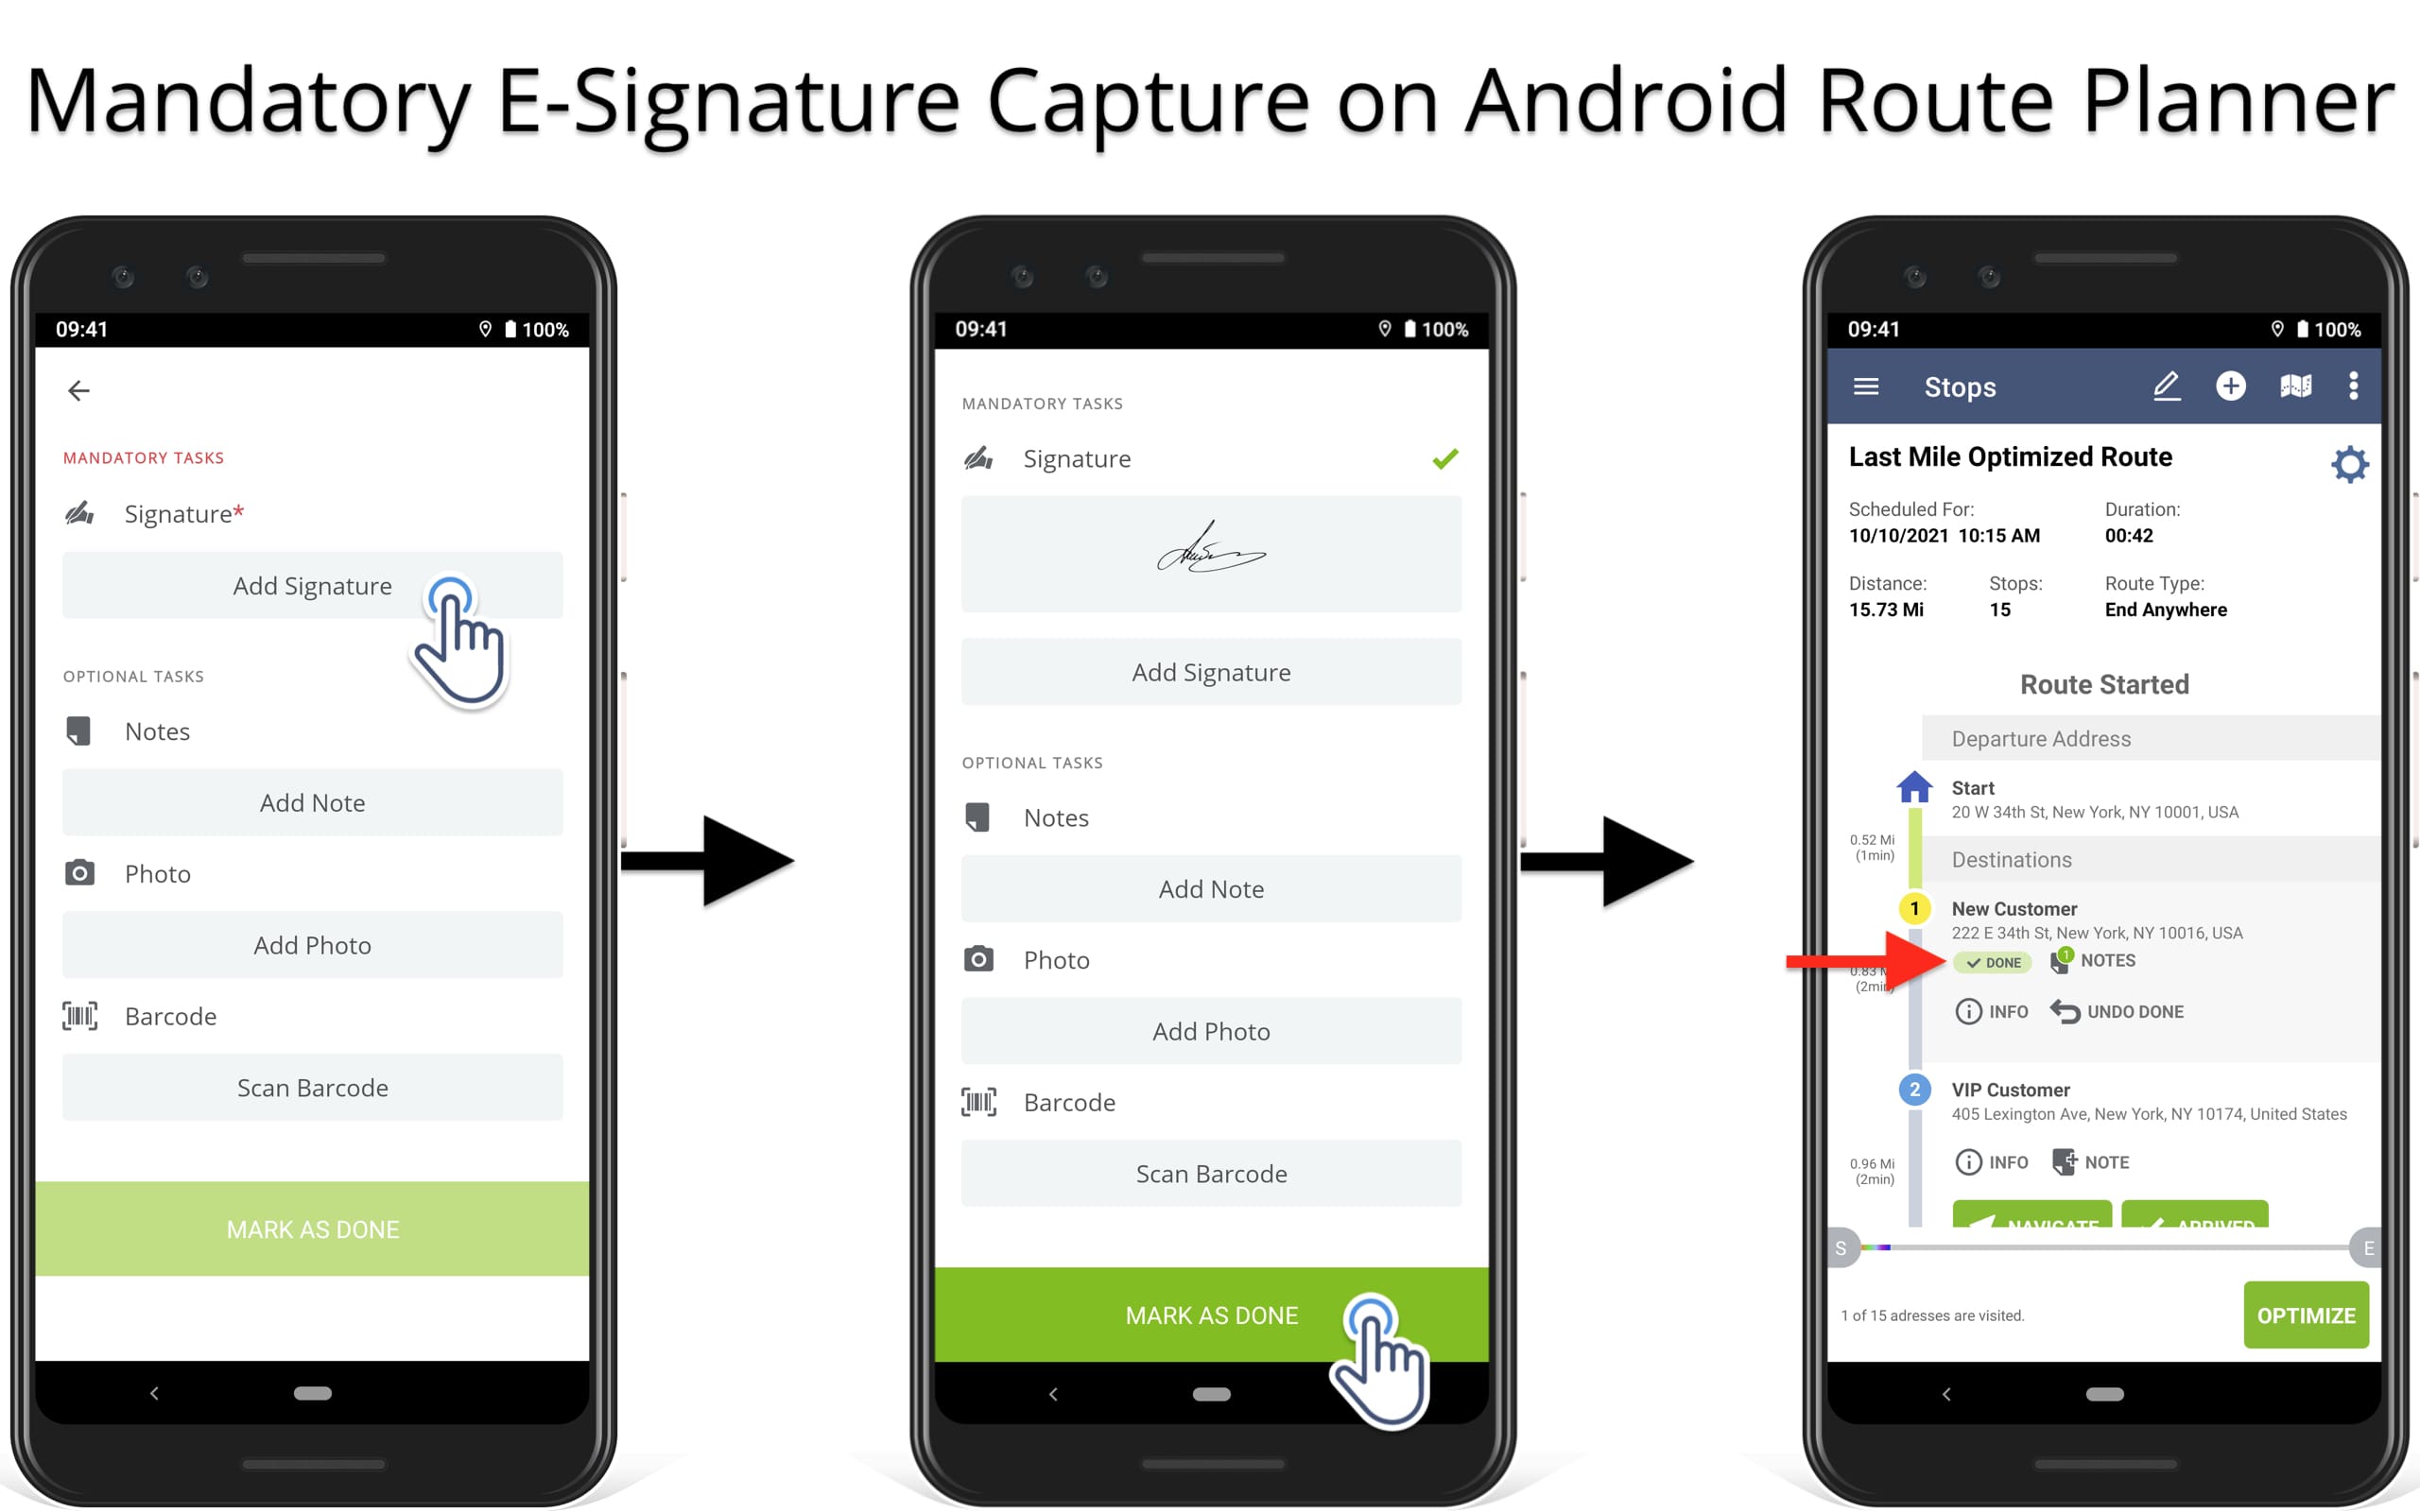 Attach mandatory signature as proof of delivery or proof of service on mobile route planner app.